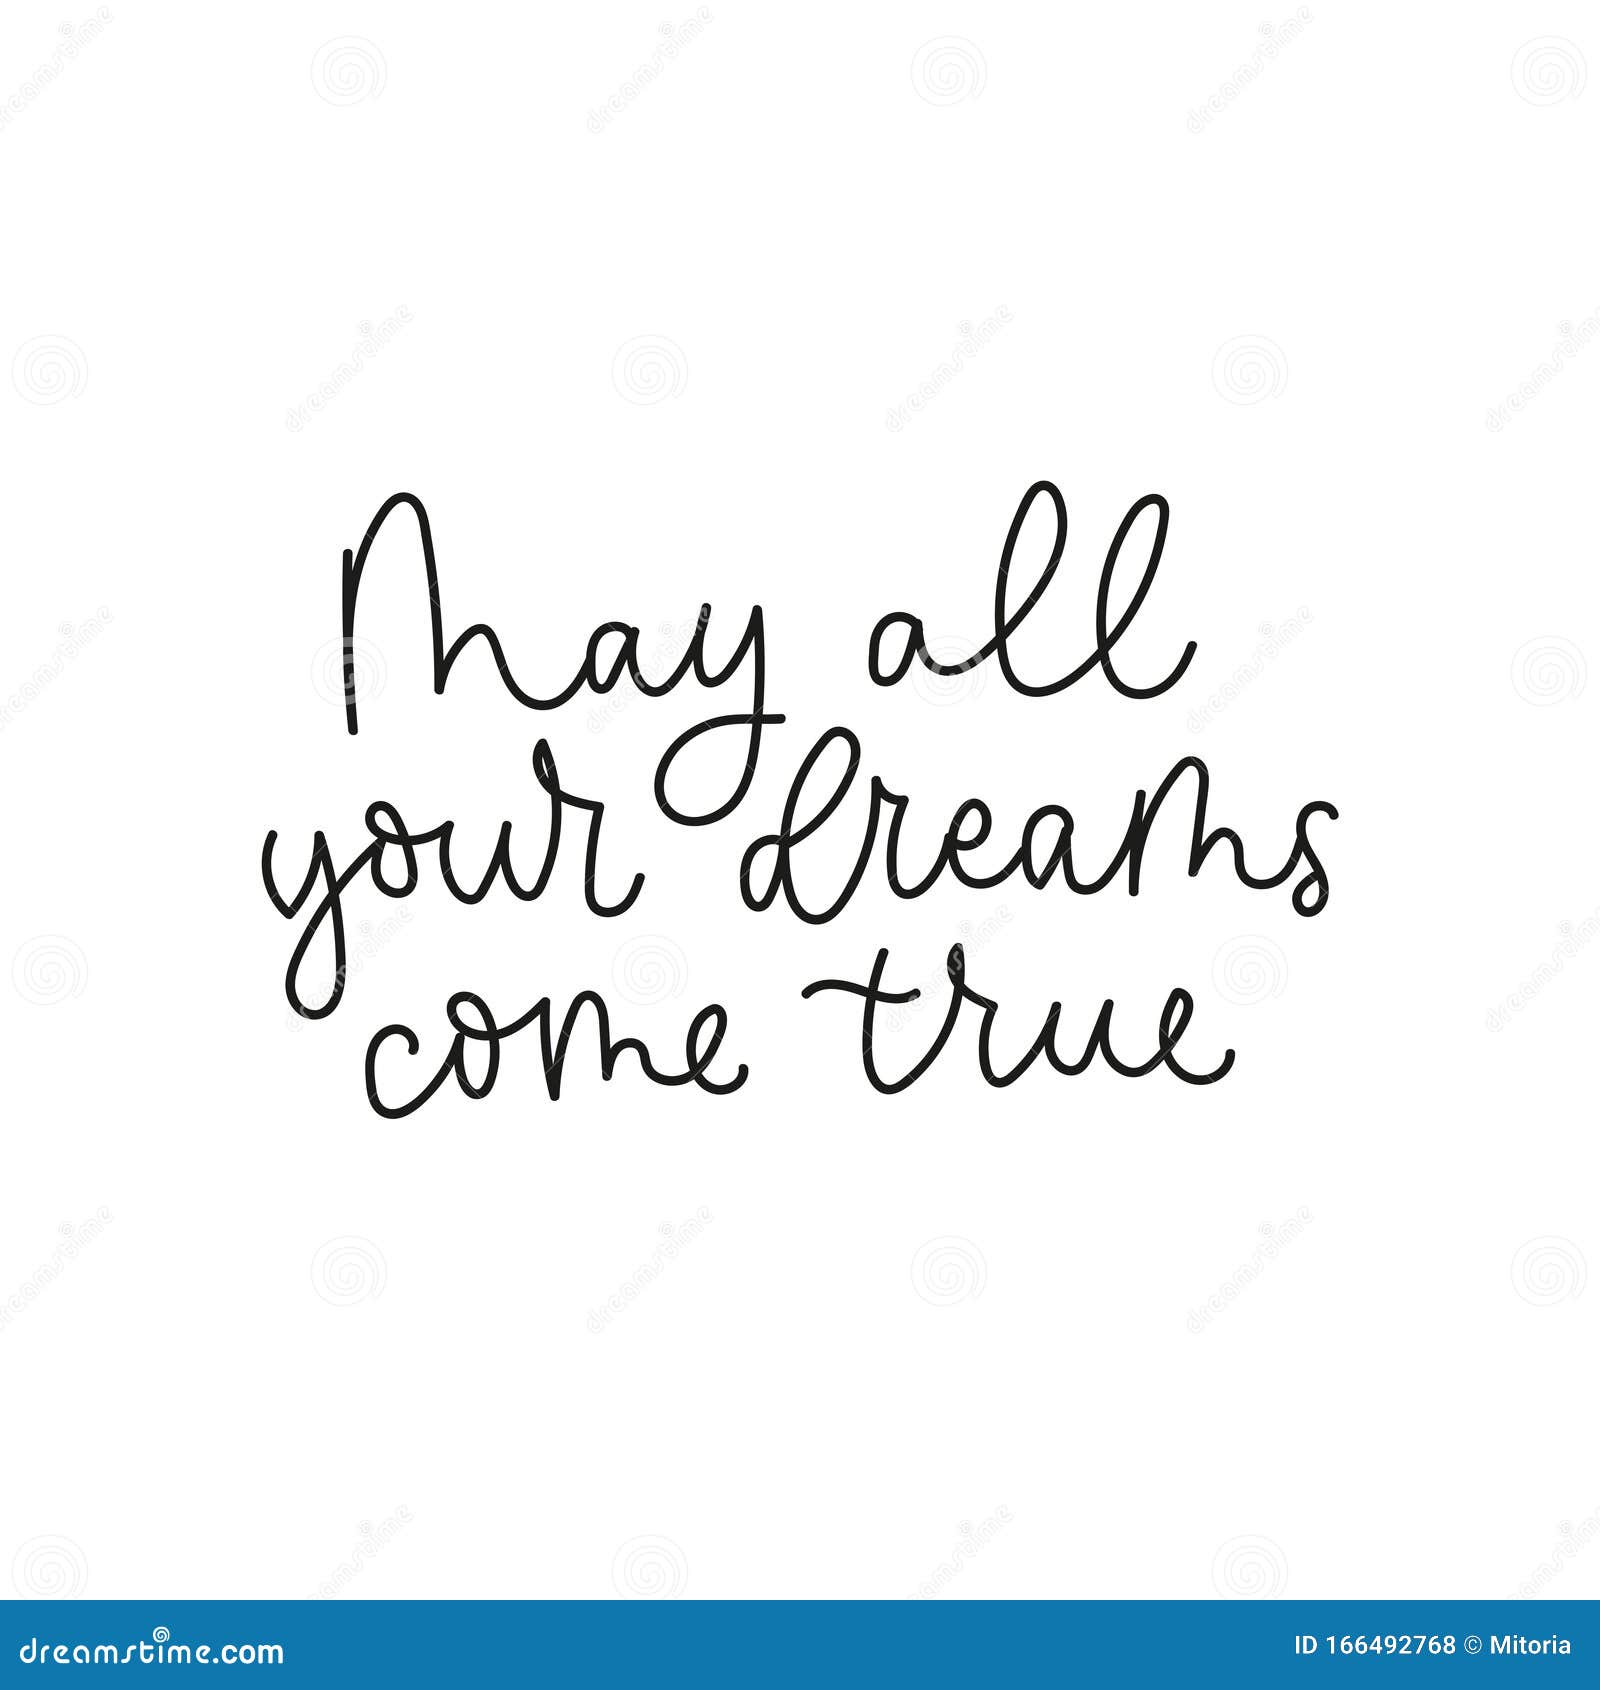 Top 95+ Images may all your dreams come true quotes Completed